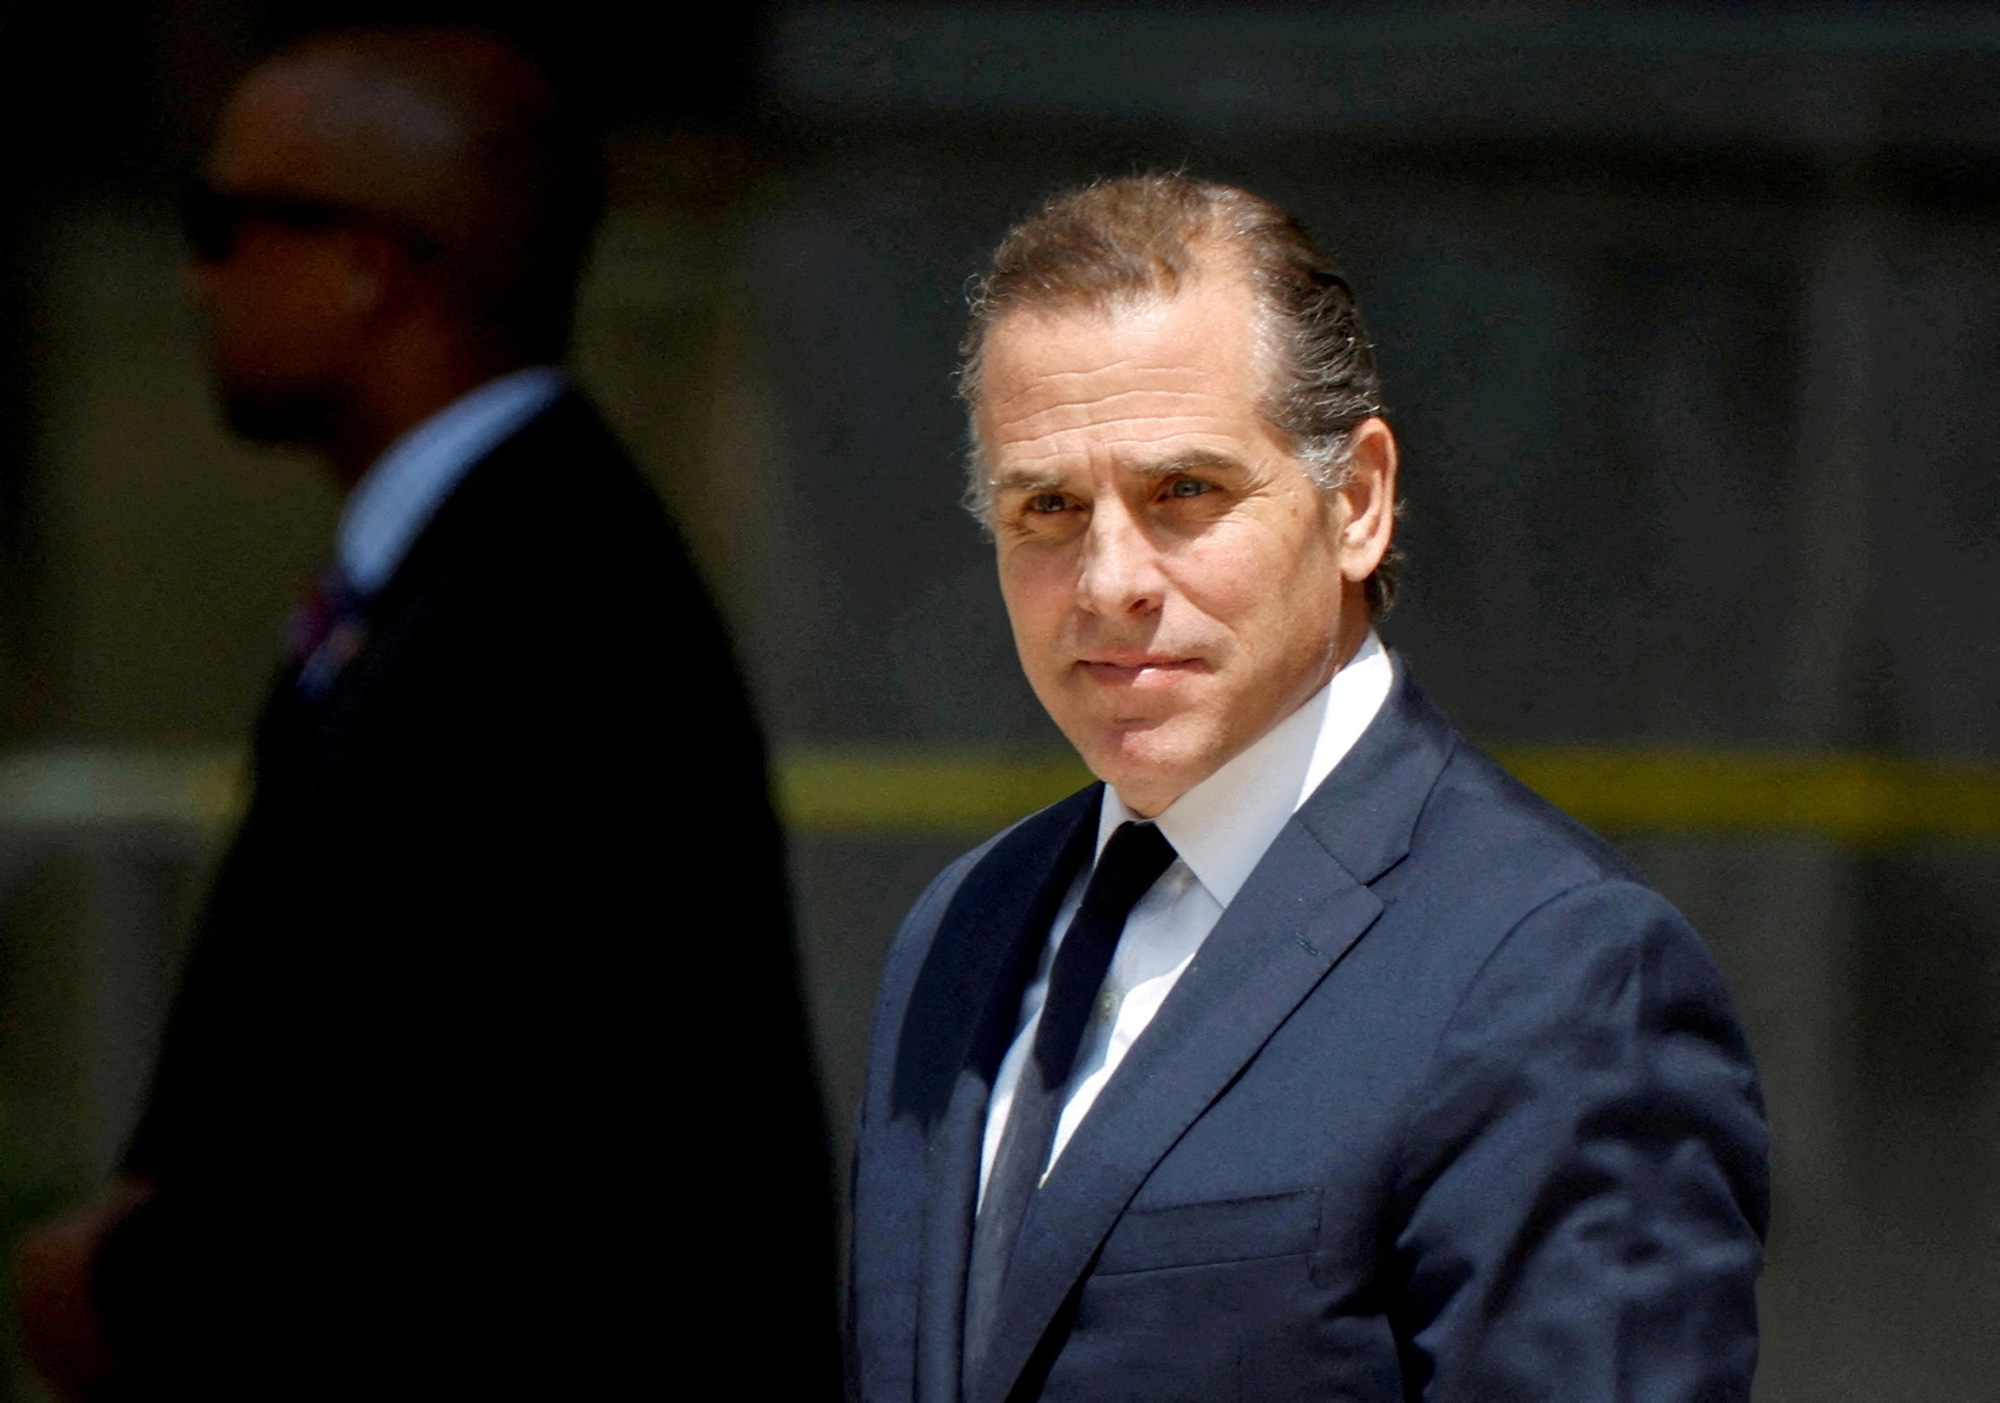 Live updates The latest on Hunter Biden's first court appearance in